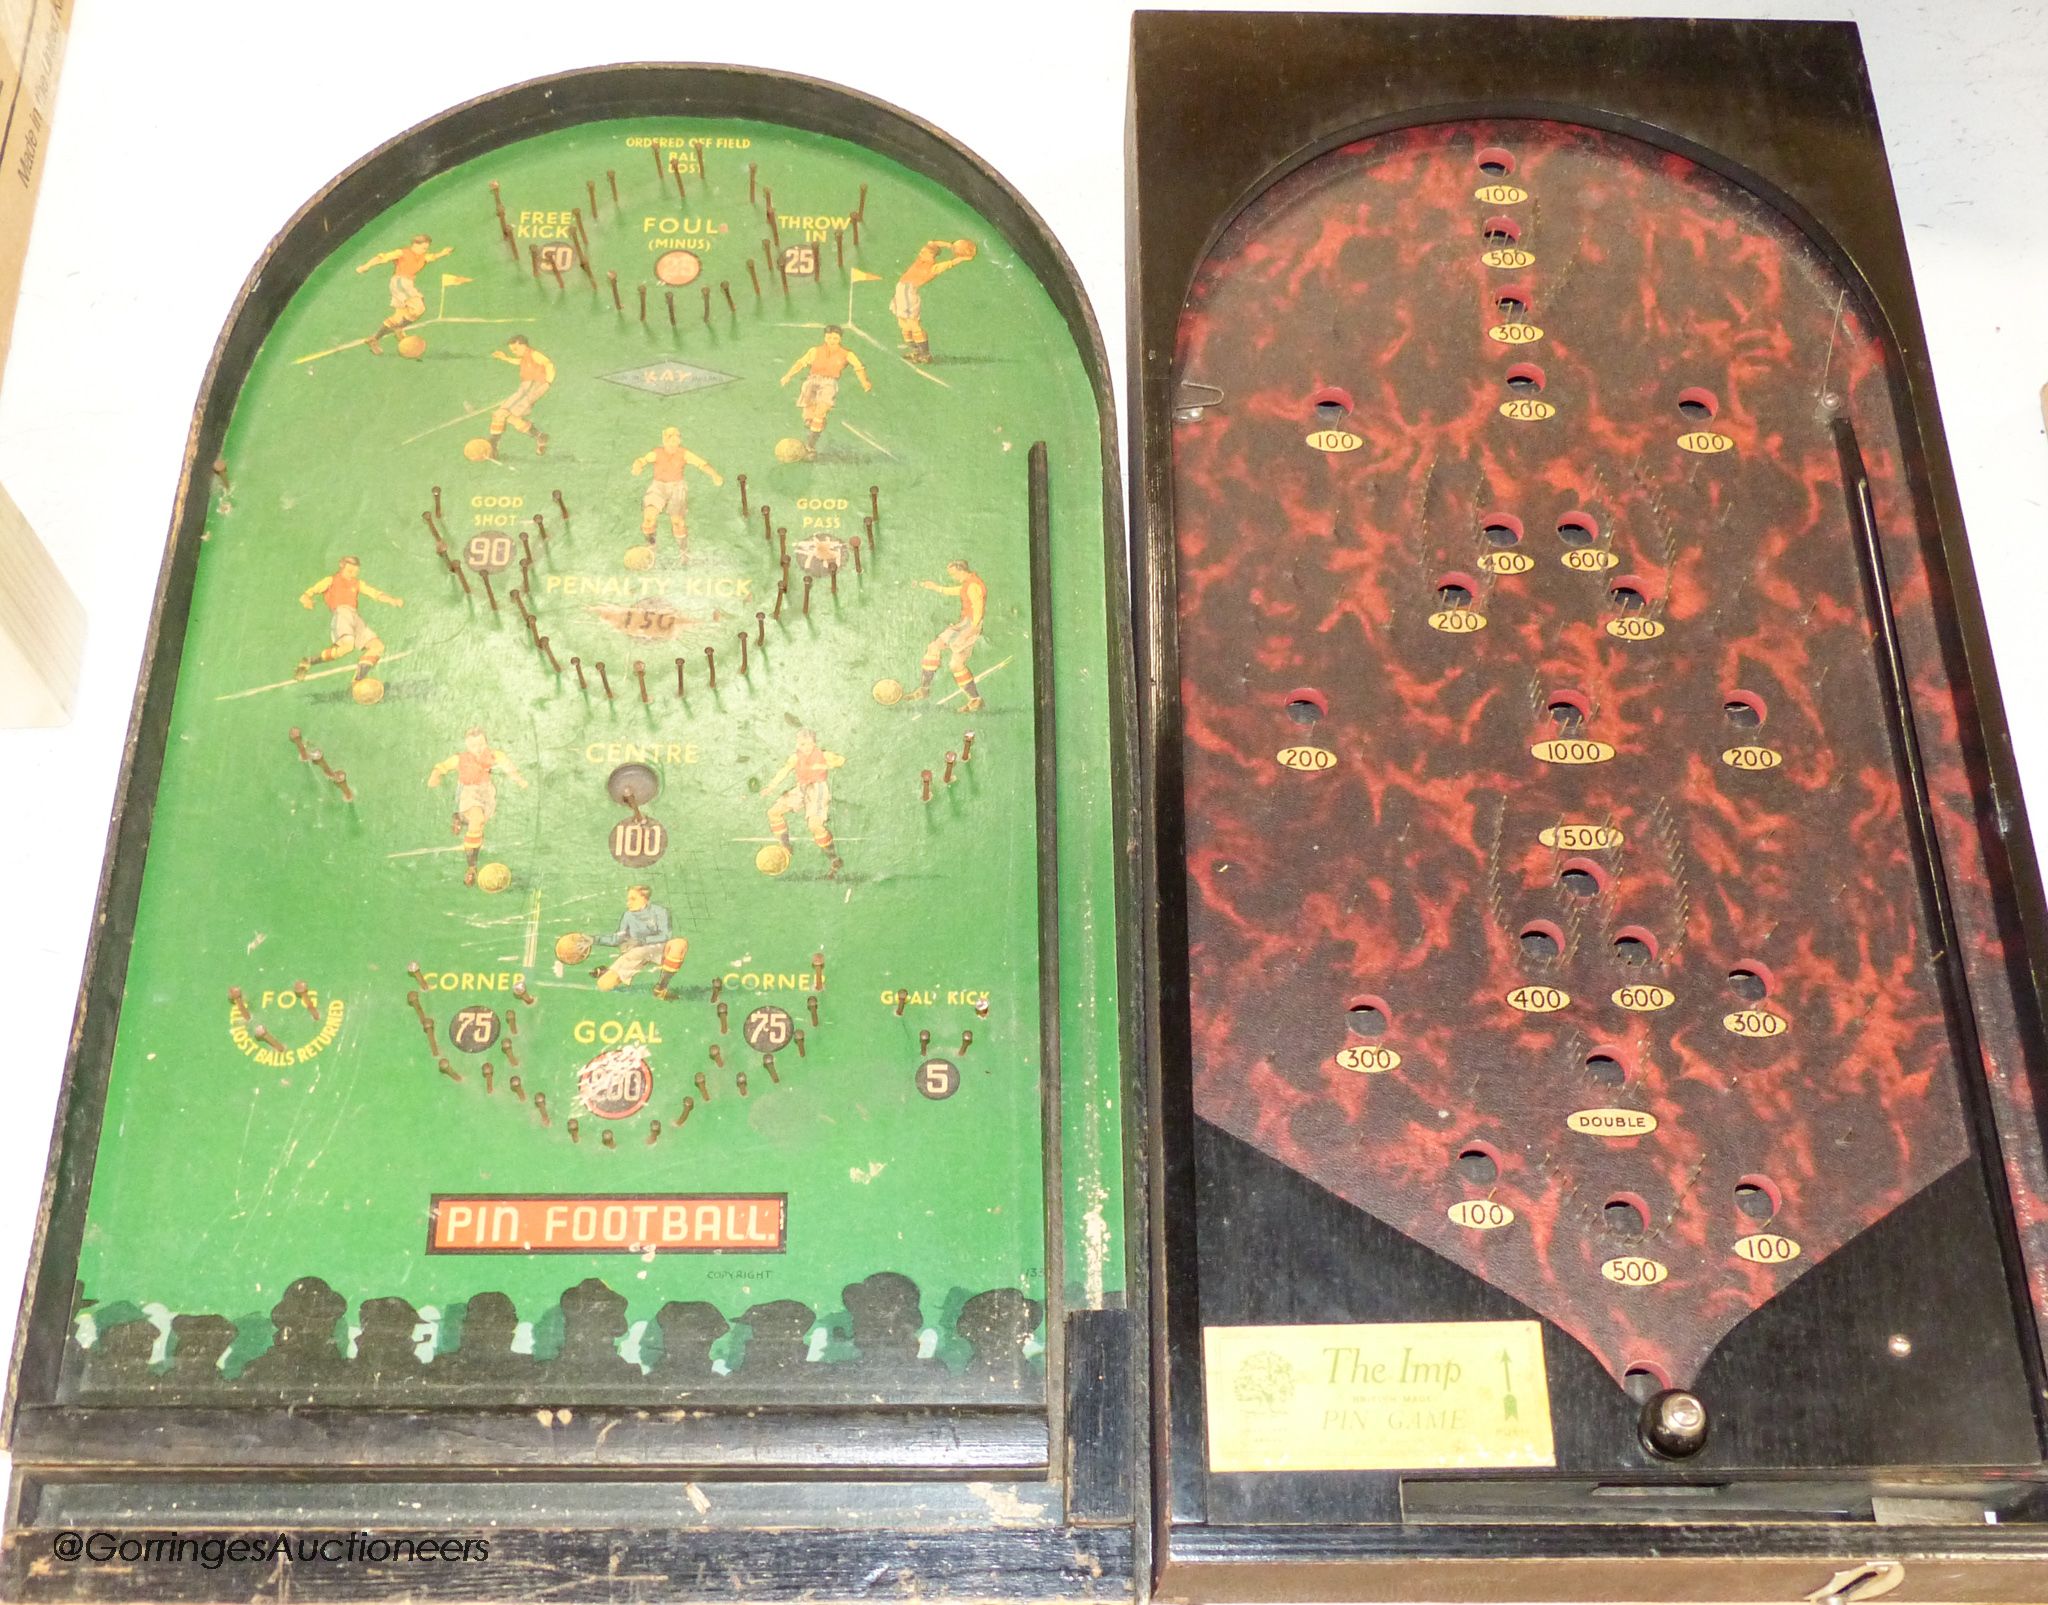 A pin football board and The Imp pin game